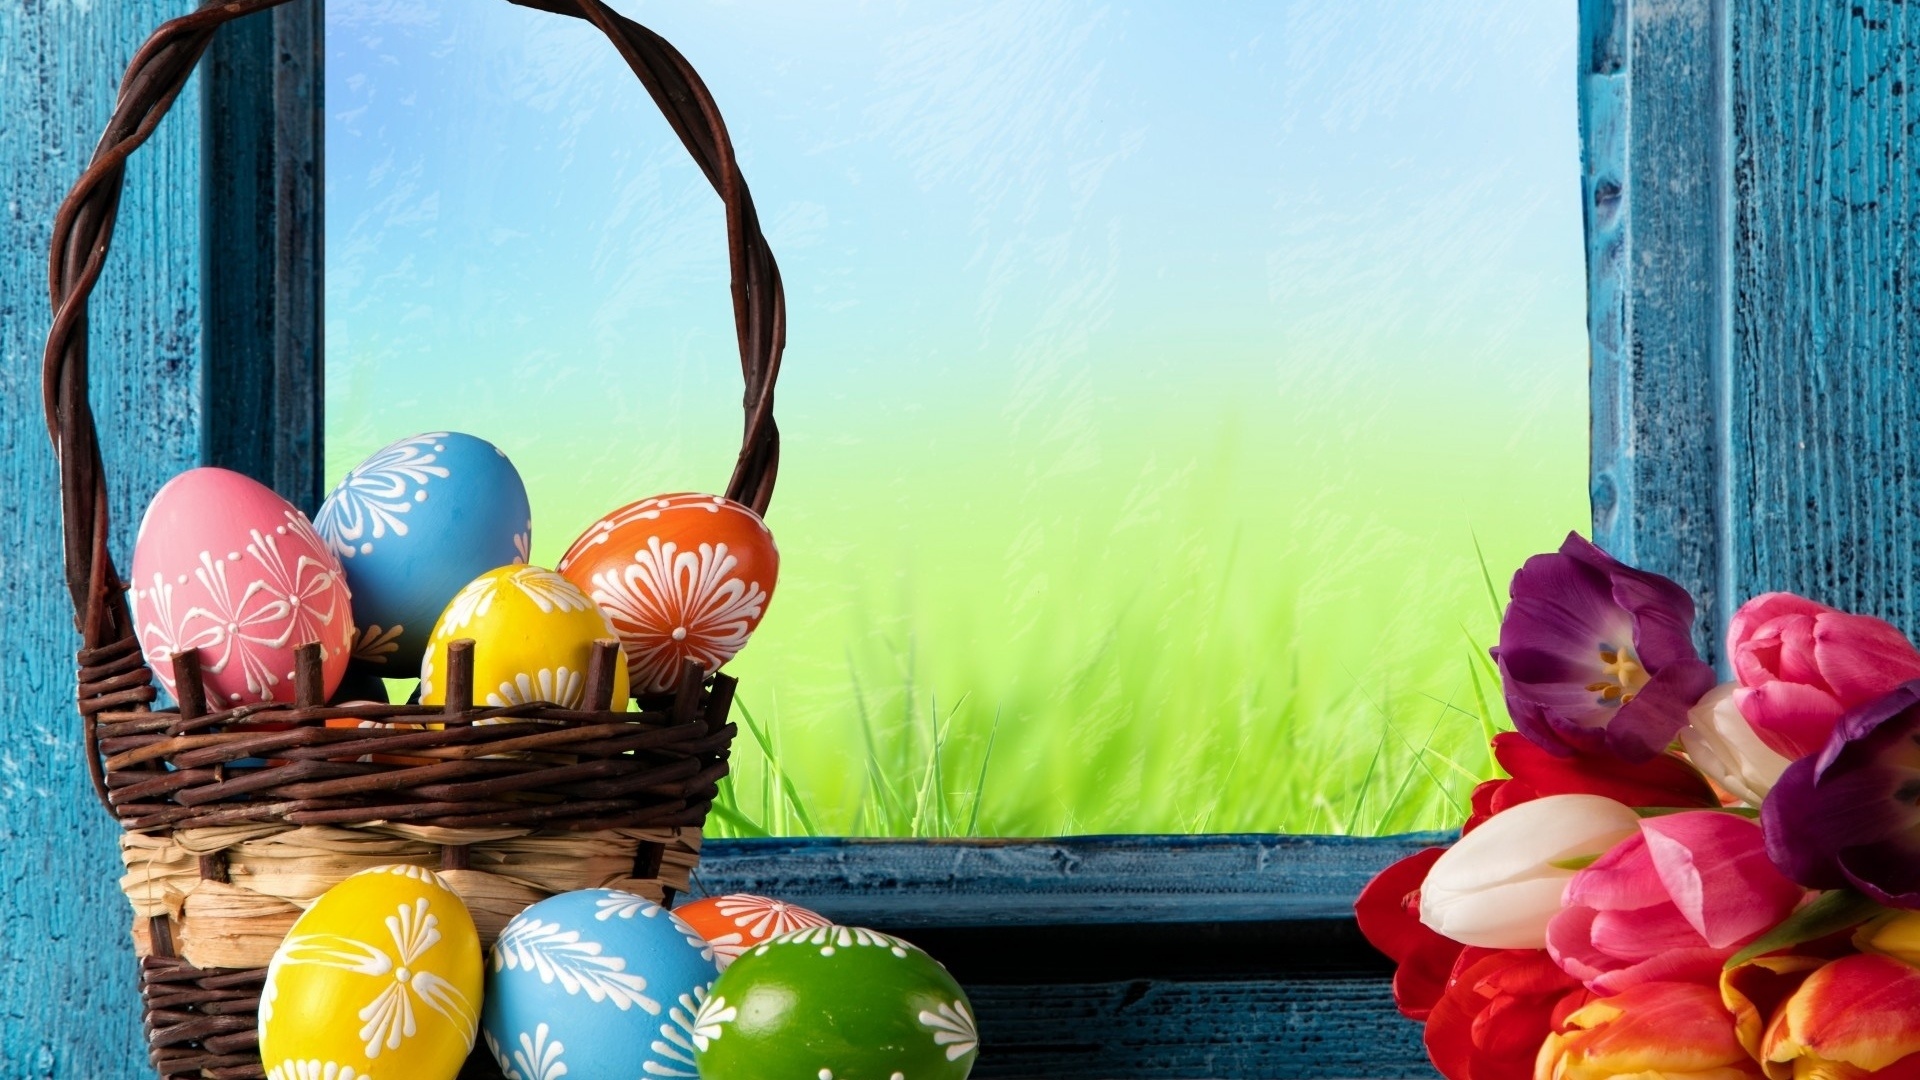 Easter Eggs In A Basket computer wallpaper